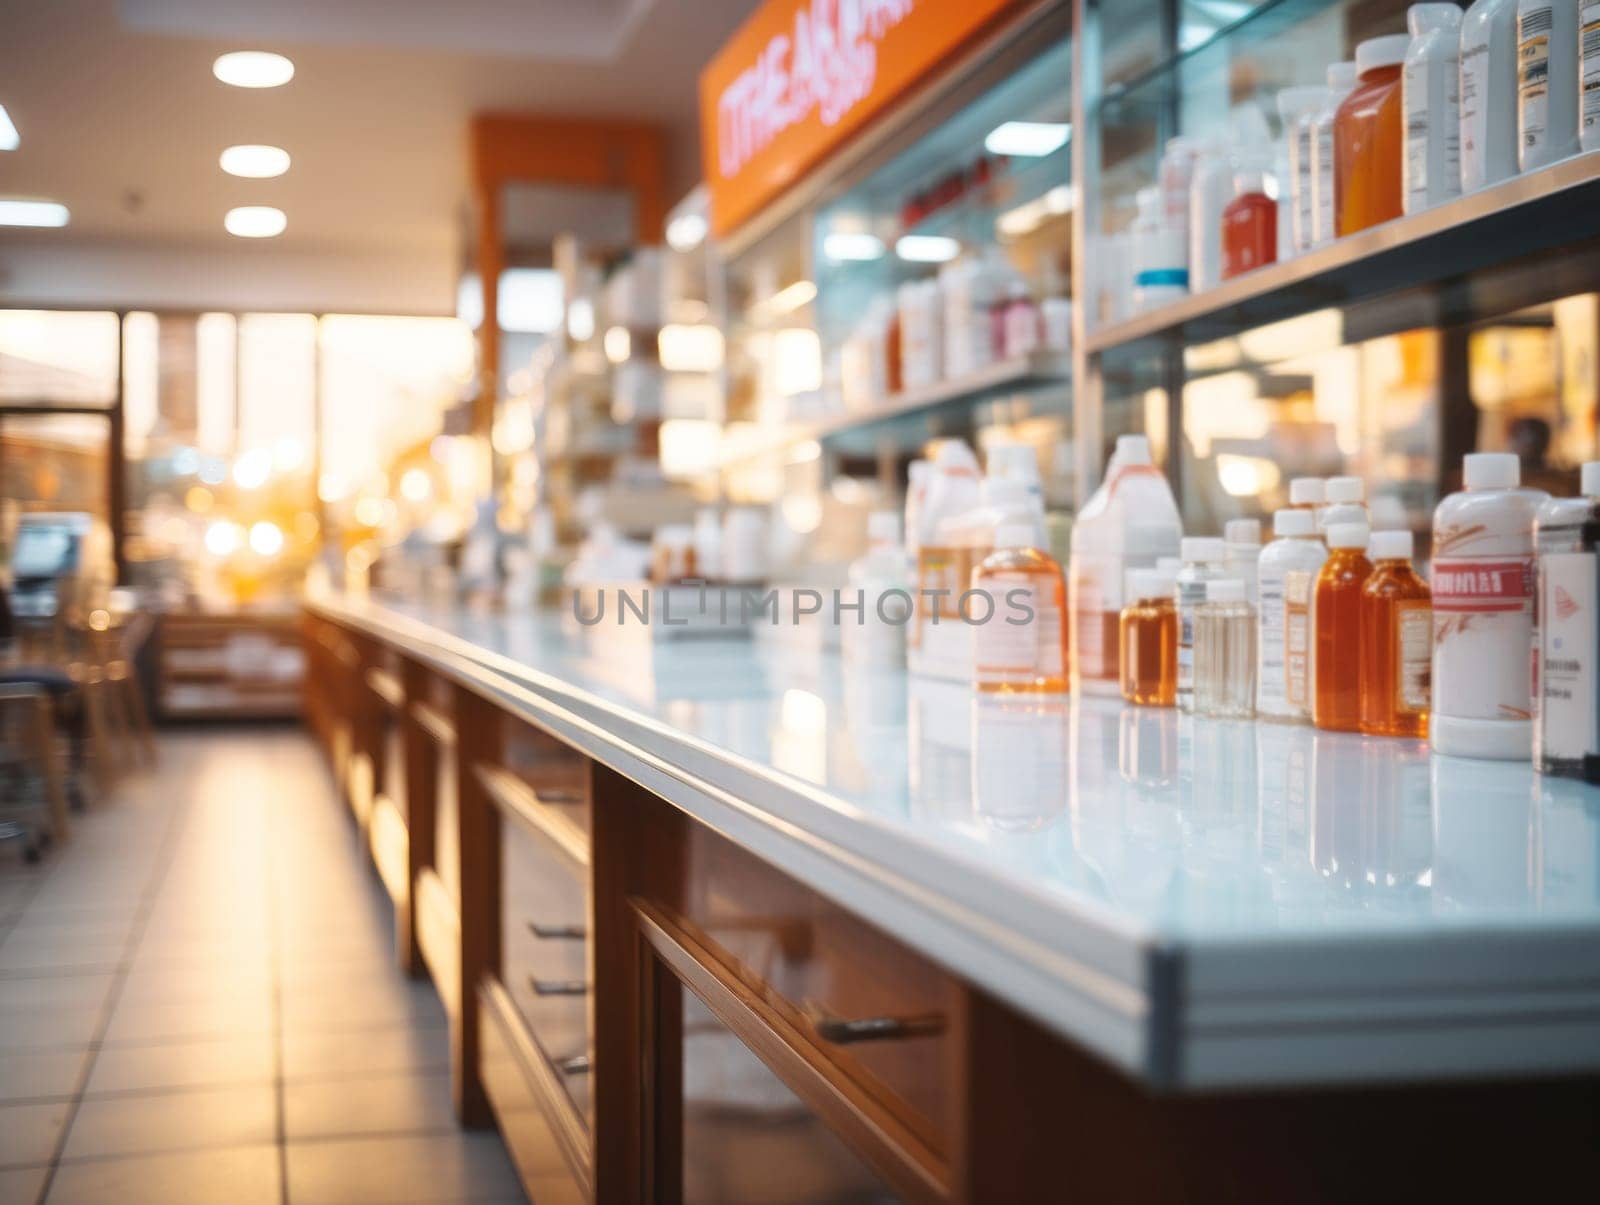 Blurred background of a pharmacy store.